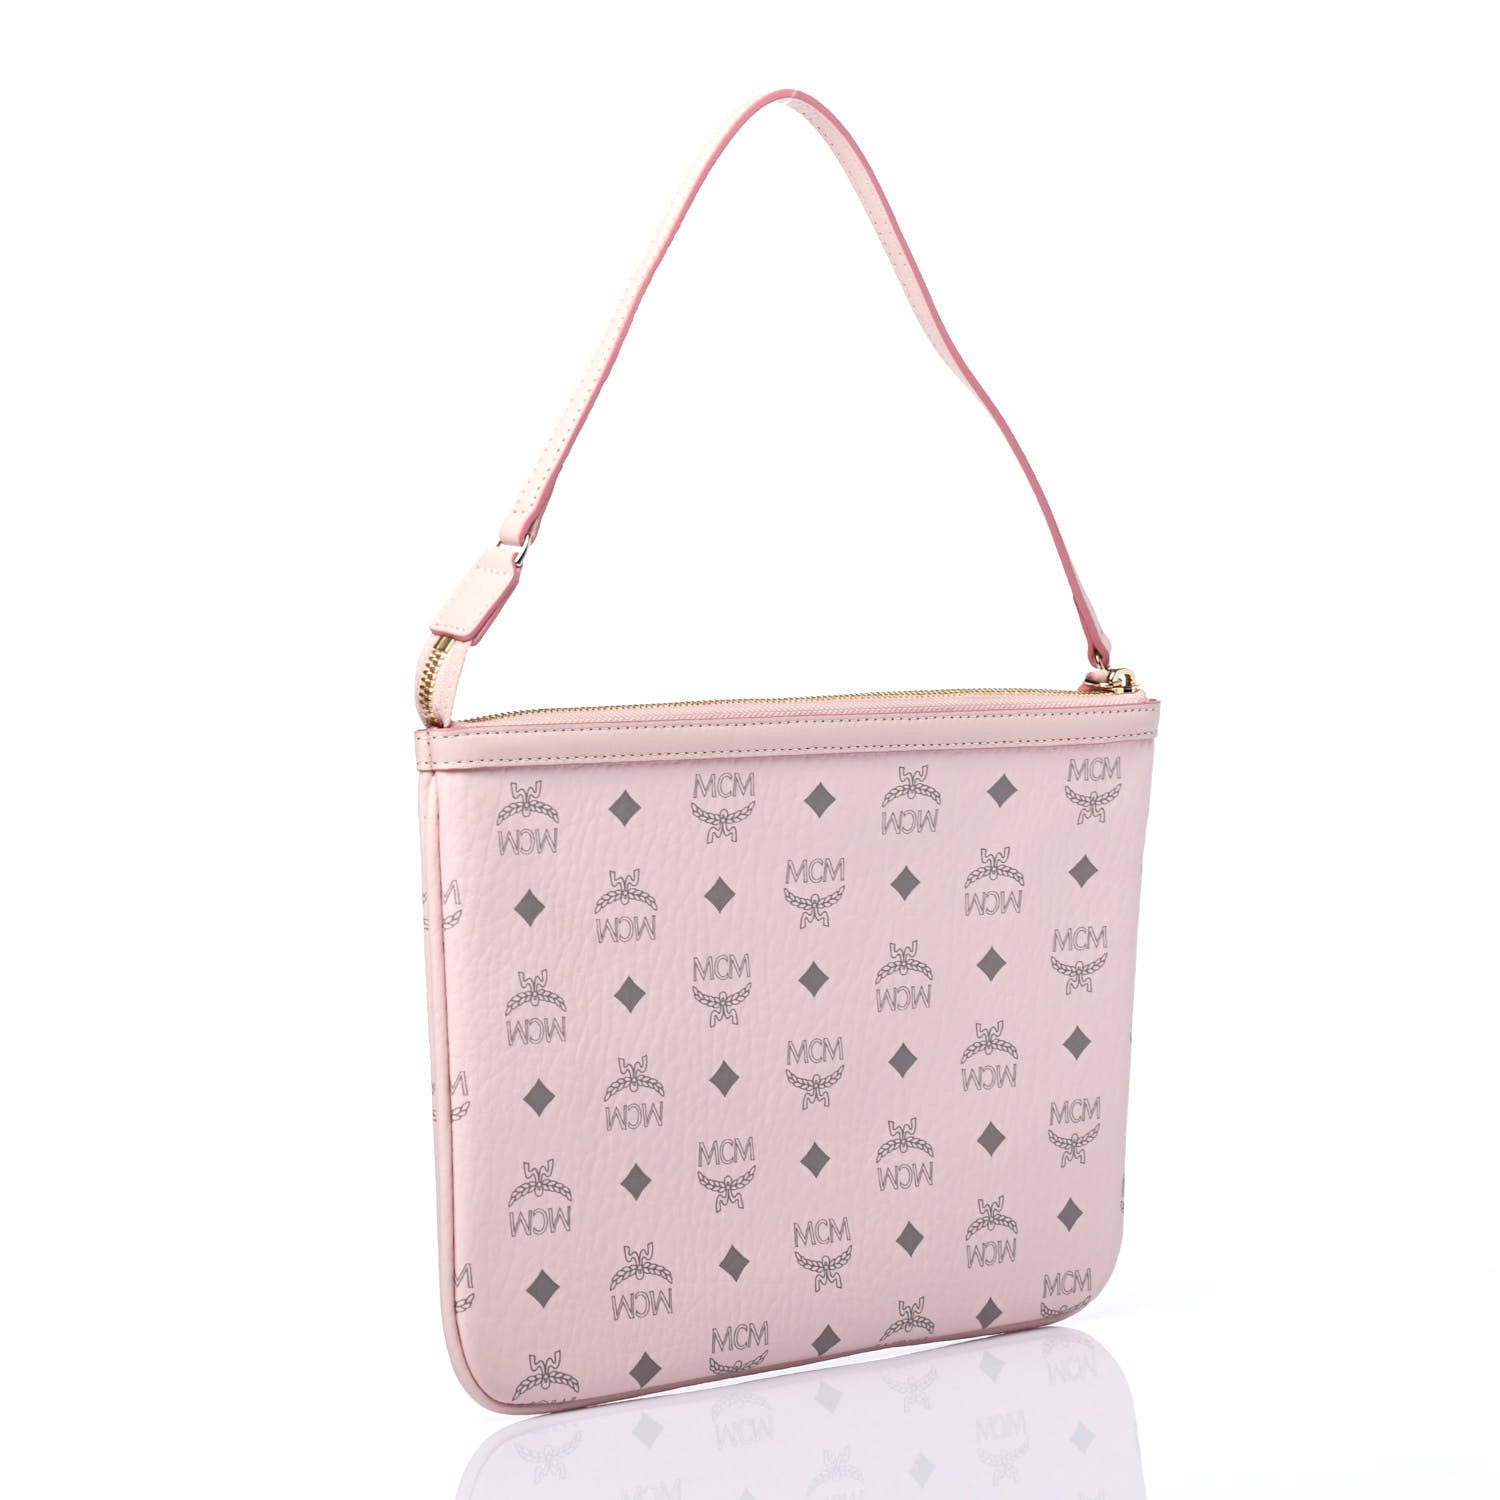 MCM Monogram Pouch Bag Wallet Pink compact size 23×15cm Not for Sale Novelty